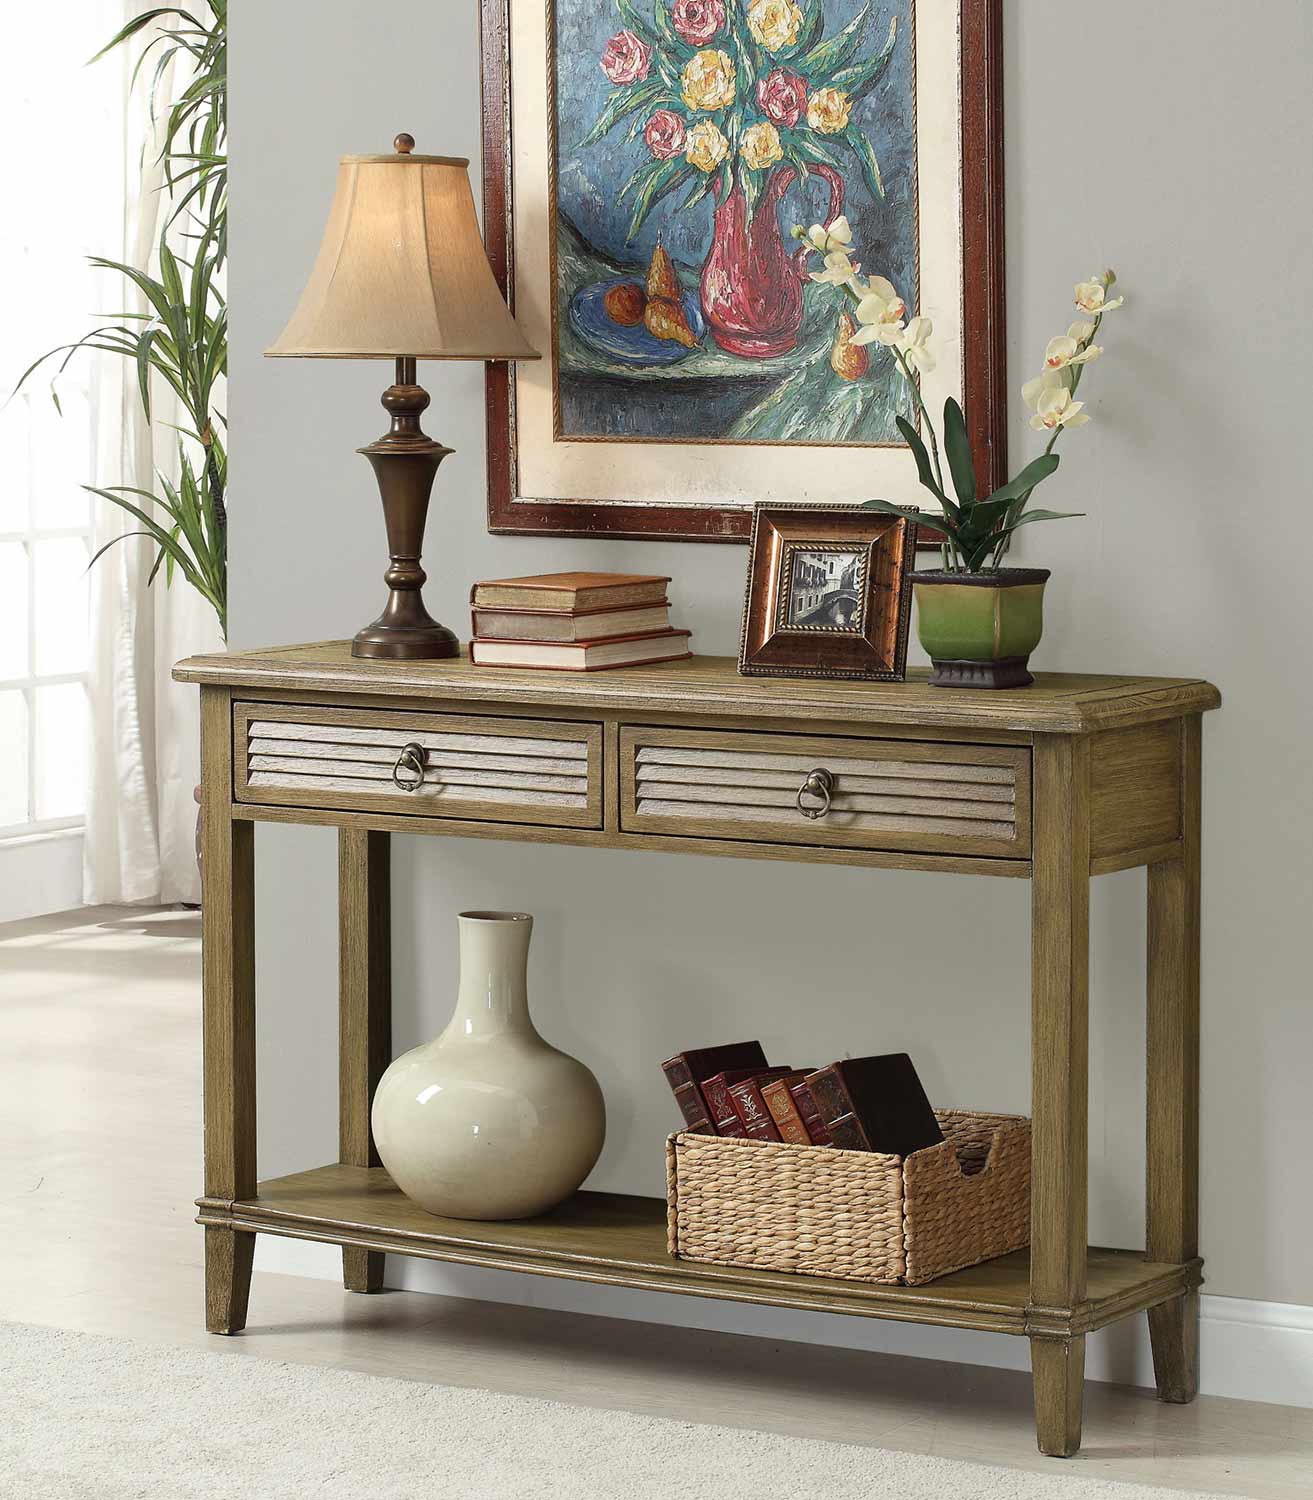 Coaster 950261 Console Table - Antique Brown